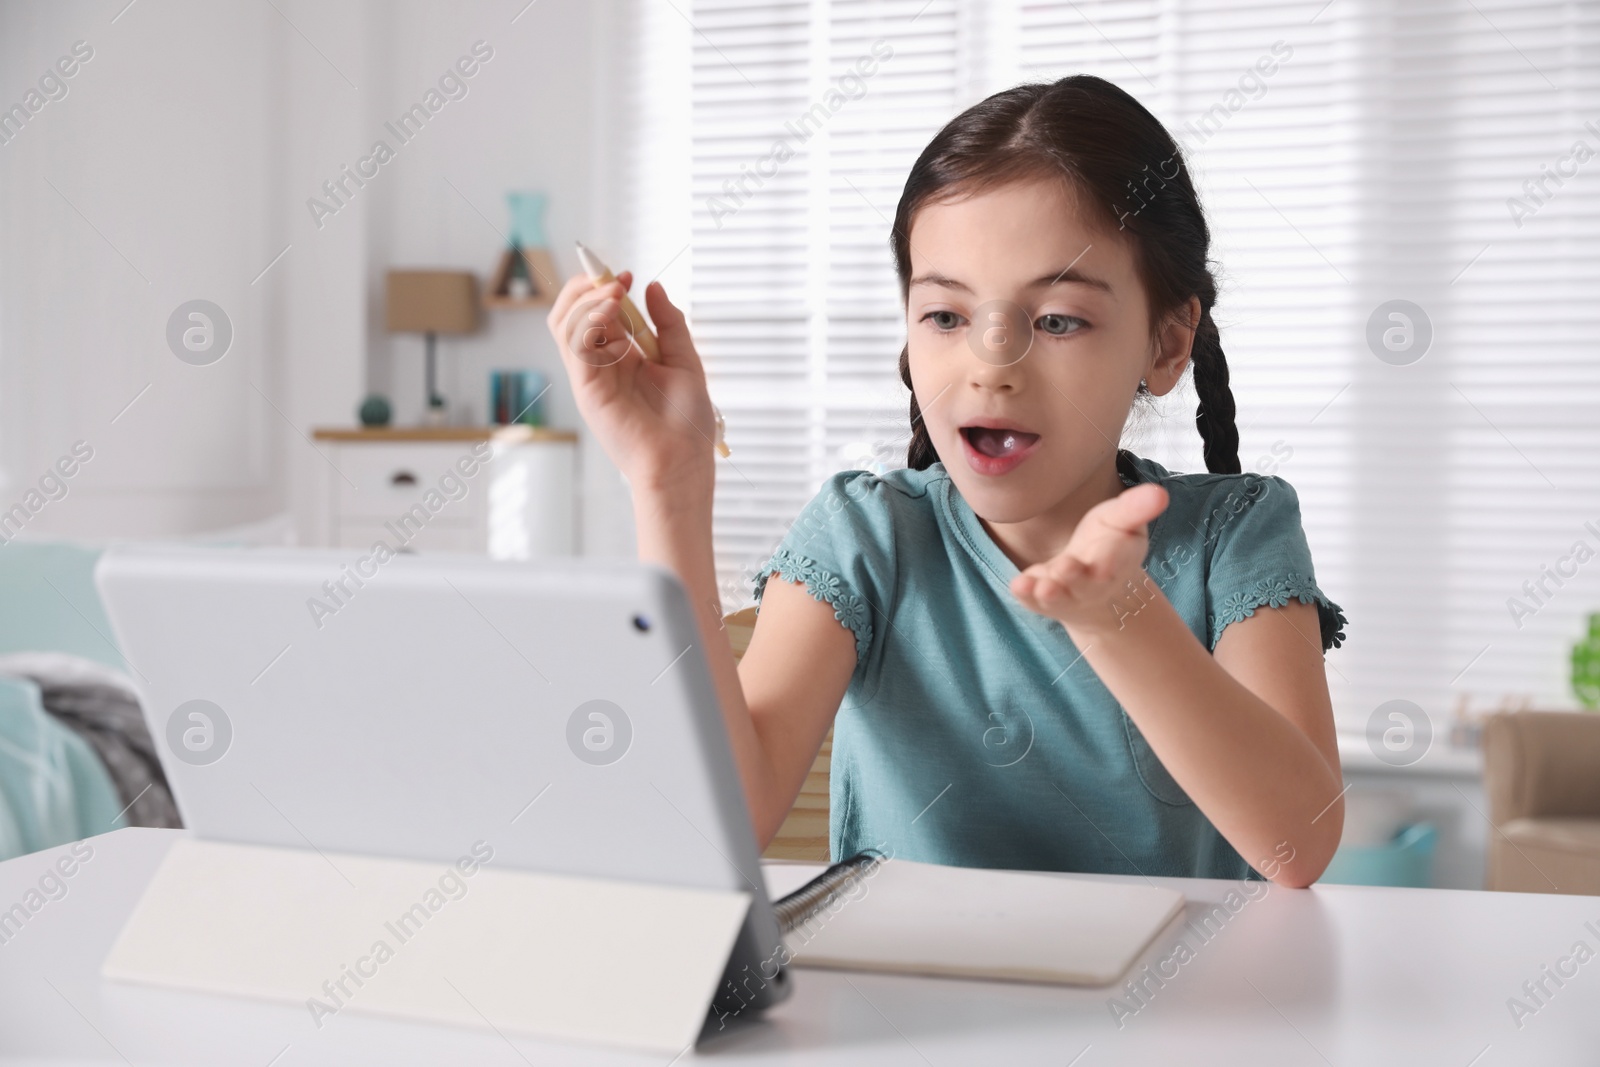 Photo of Emotional girl doing homework with tablet at table in room